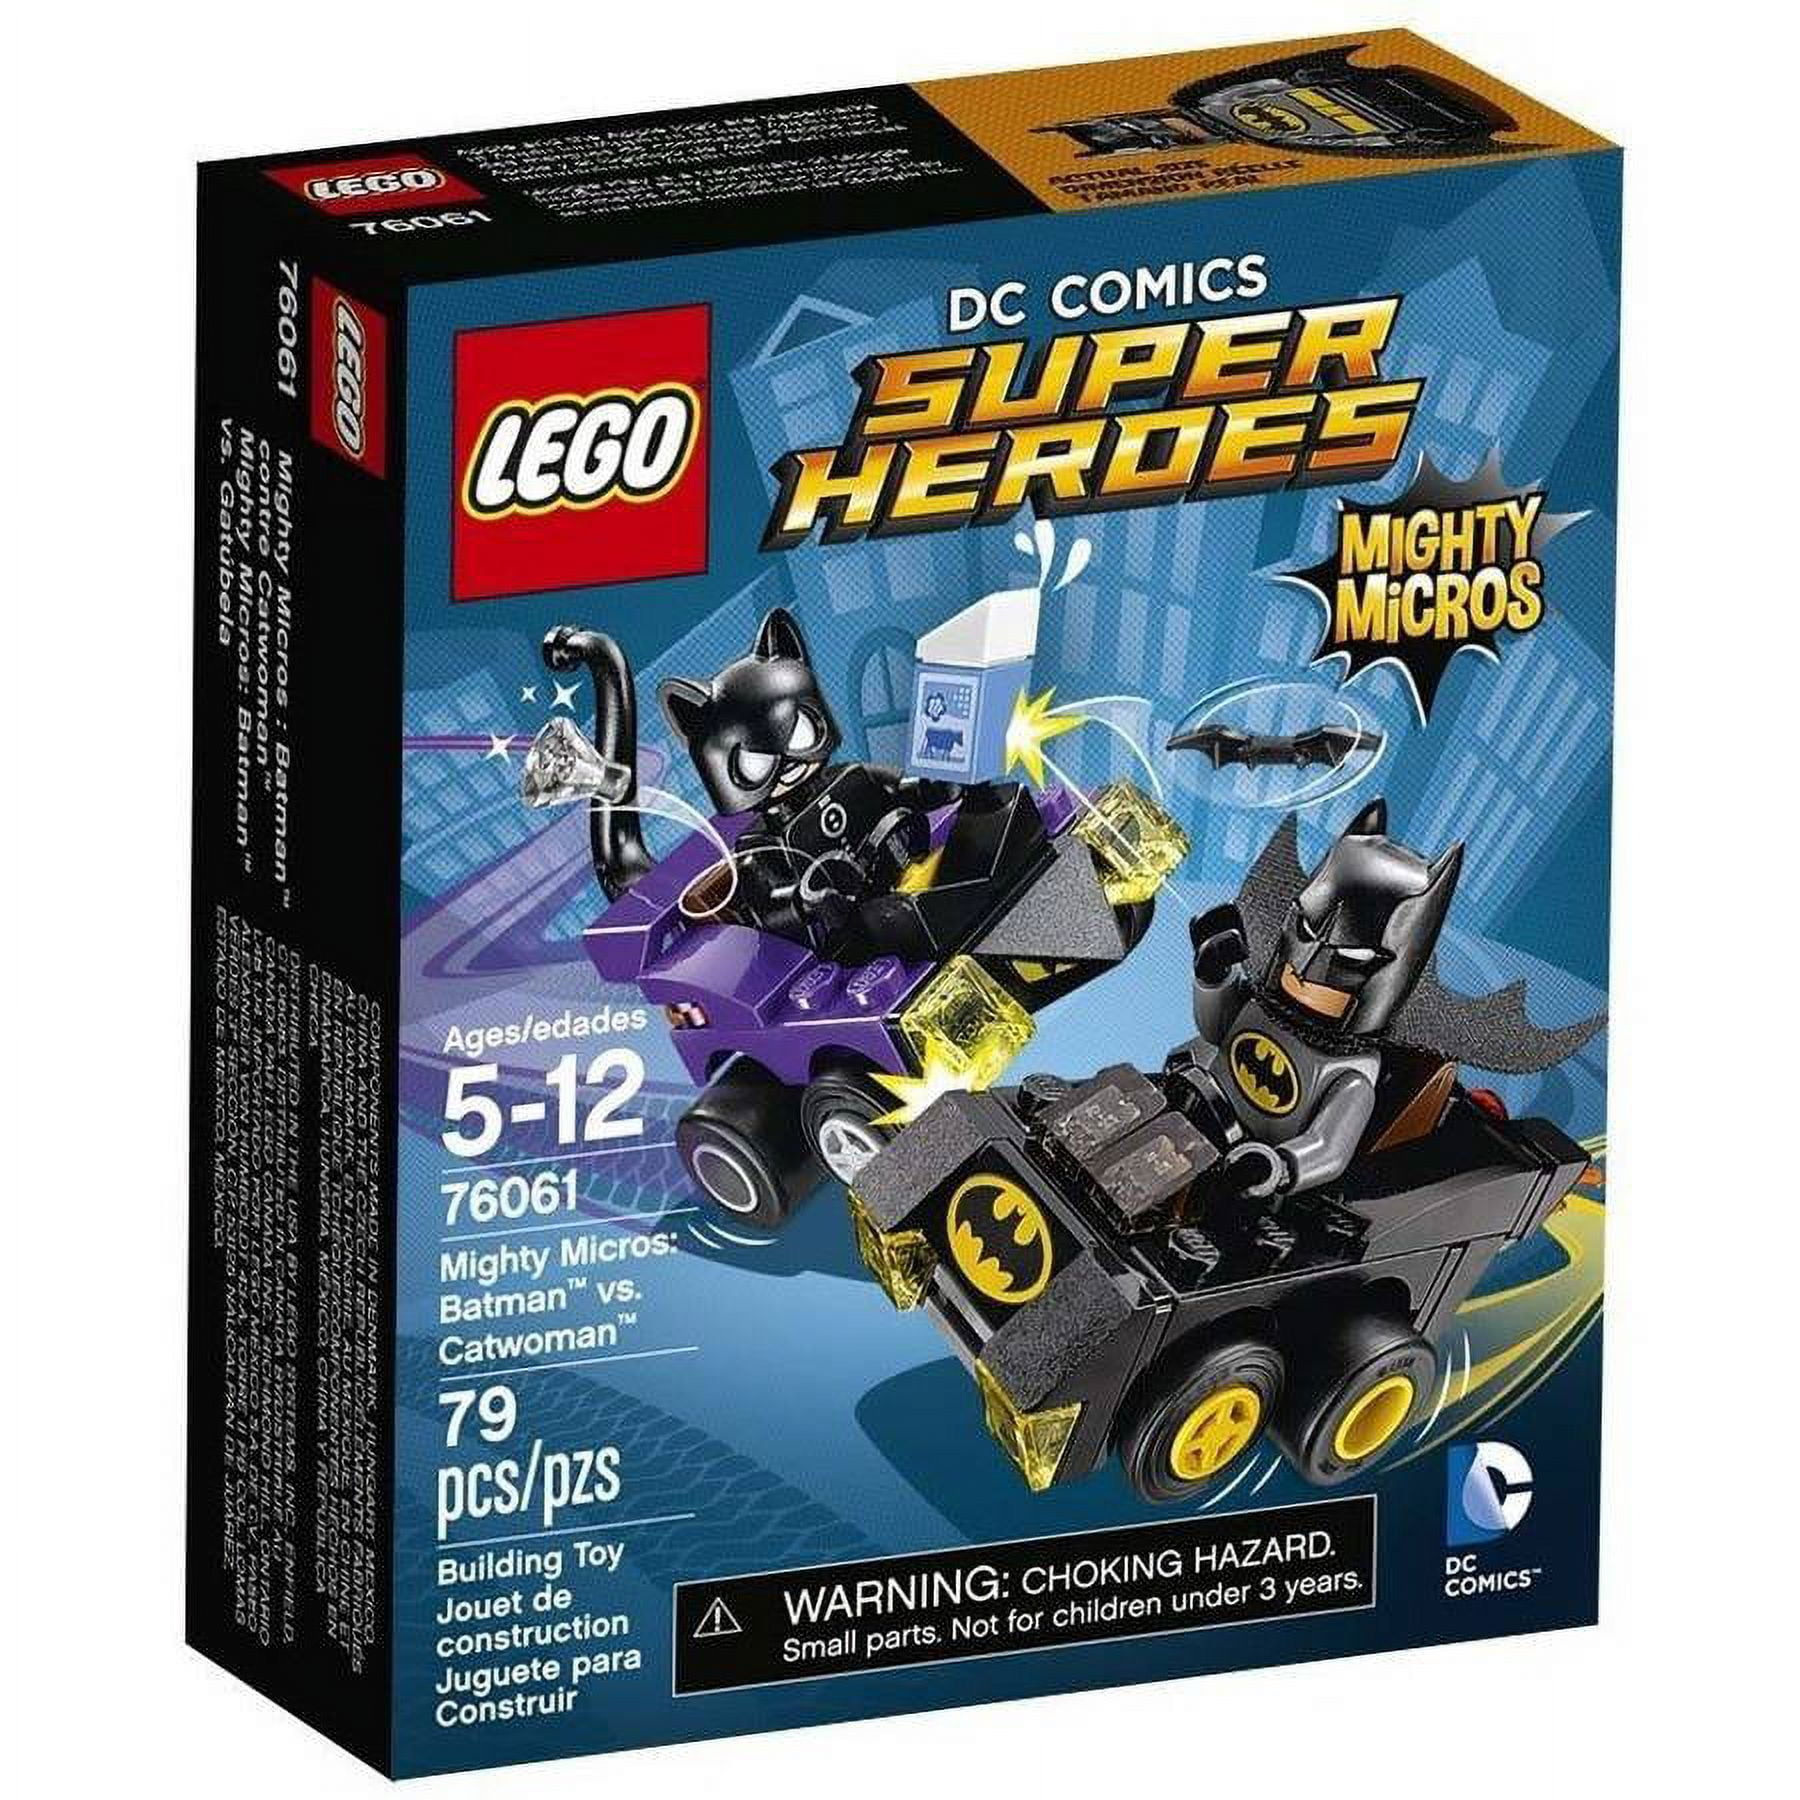  LEGO Technic The Batman – Batmobile 42127 Model Car Building  Toy, 2022 Movie Set, Superhero Gifts for Kids and Teen Fans with Light  Bricks : Toys & Games